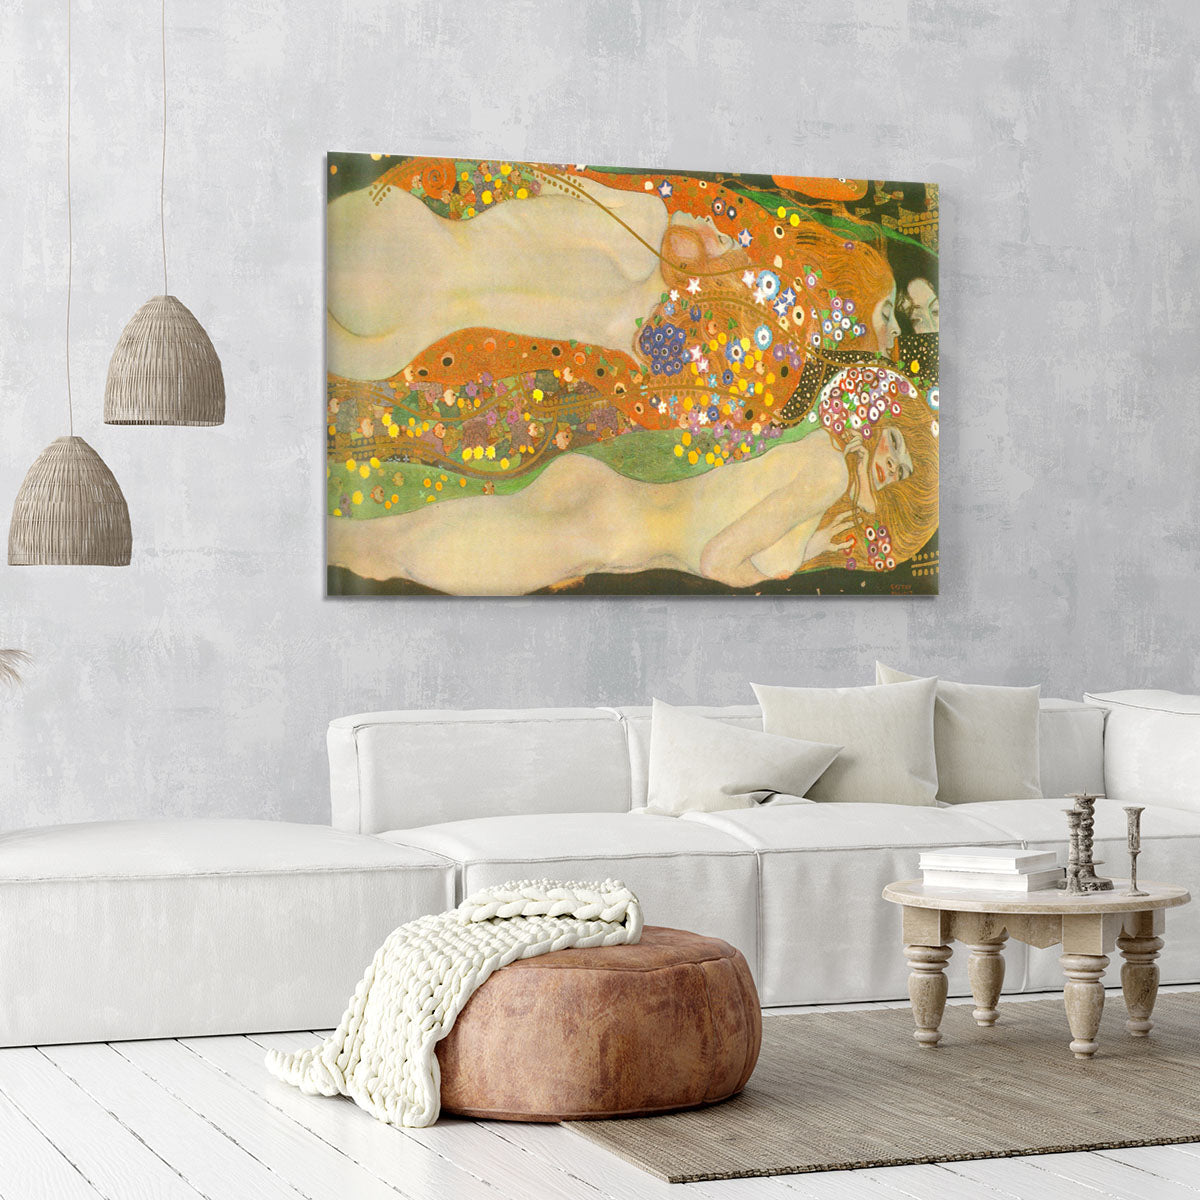 Water snakes friends II by Klimt Canvas Print or Poster - Canvas Art Rocks - 6